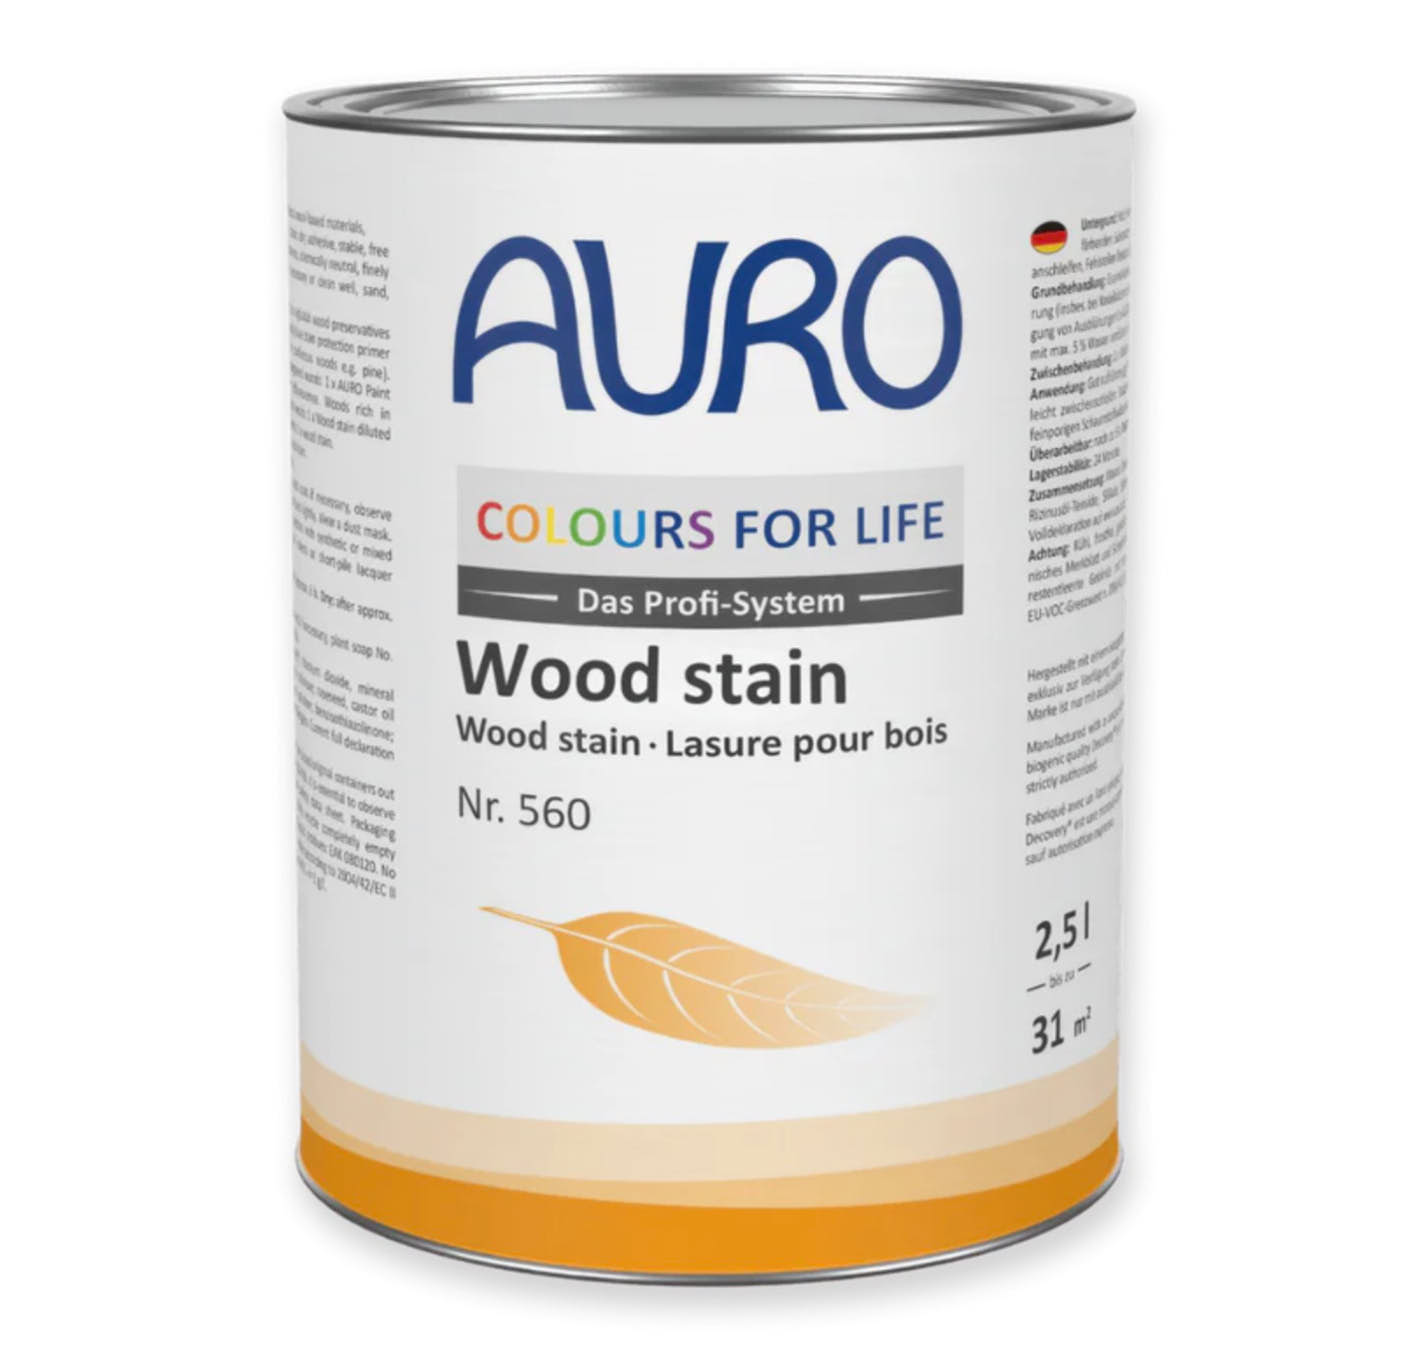 Natural Wood Stain - Auro 560